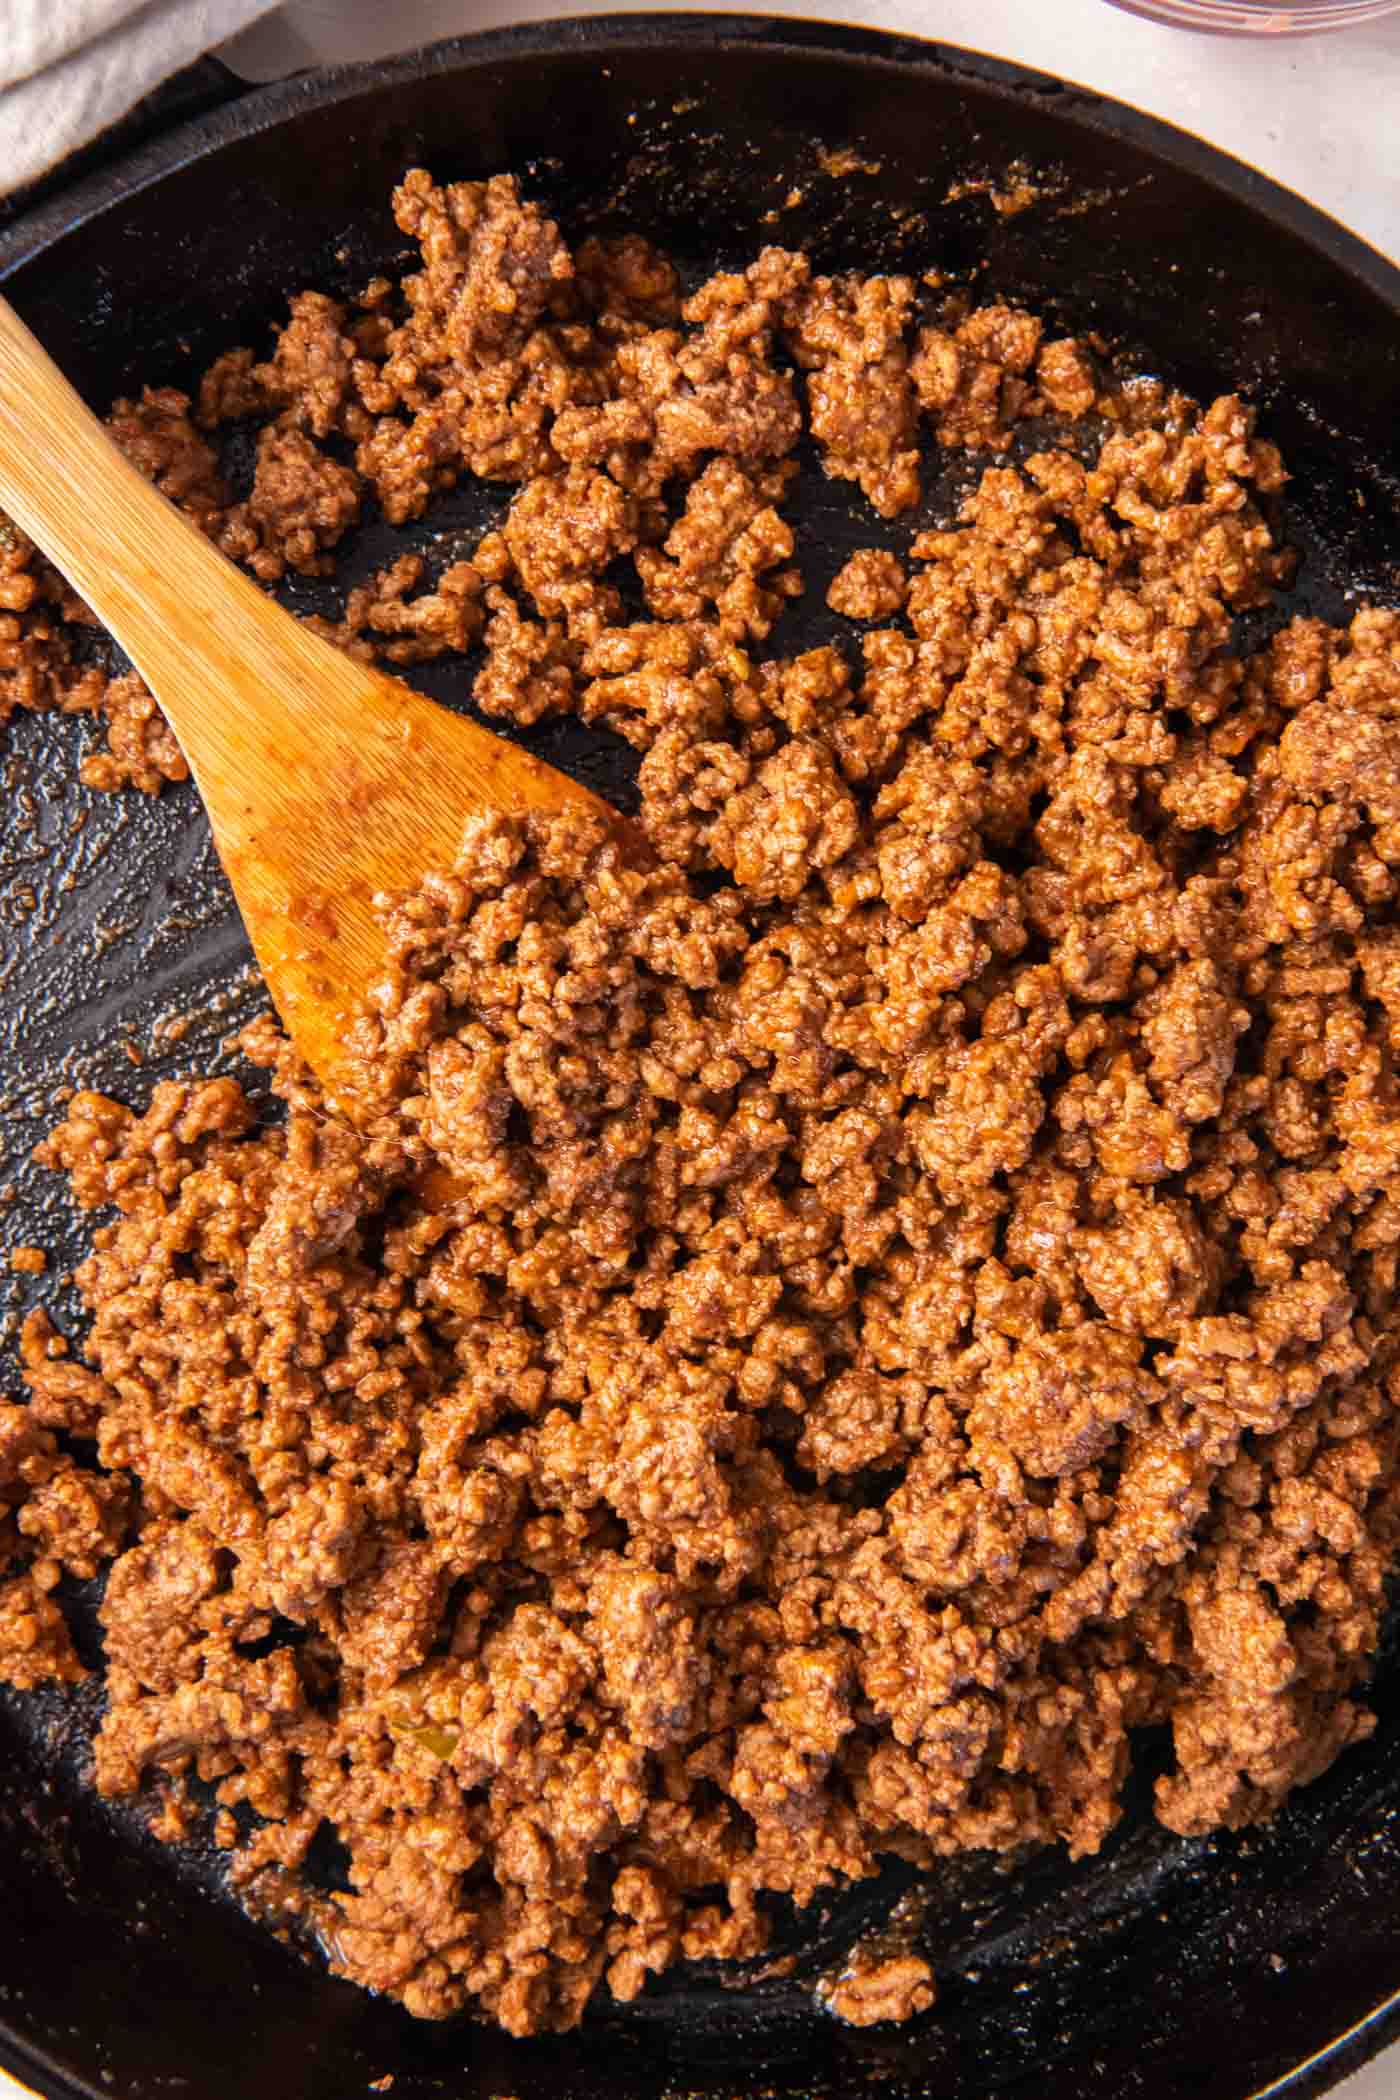 Ground beef taco meat in a skillet with a wooden spoon.